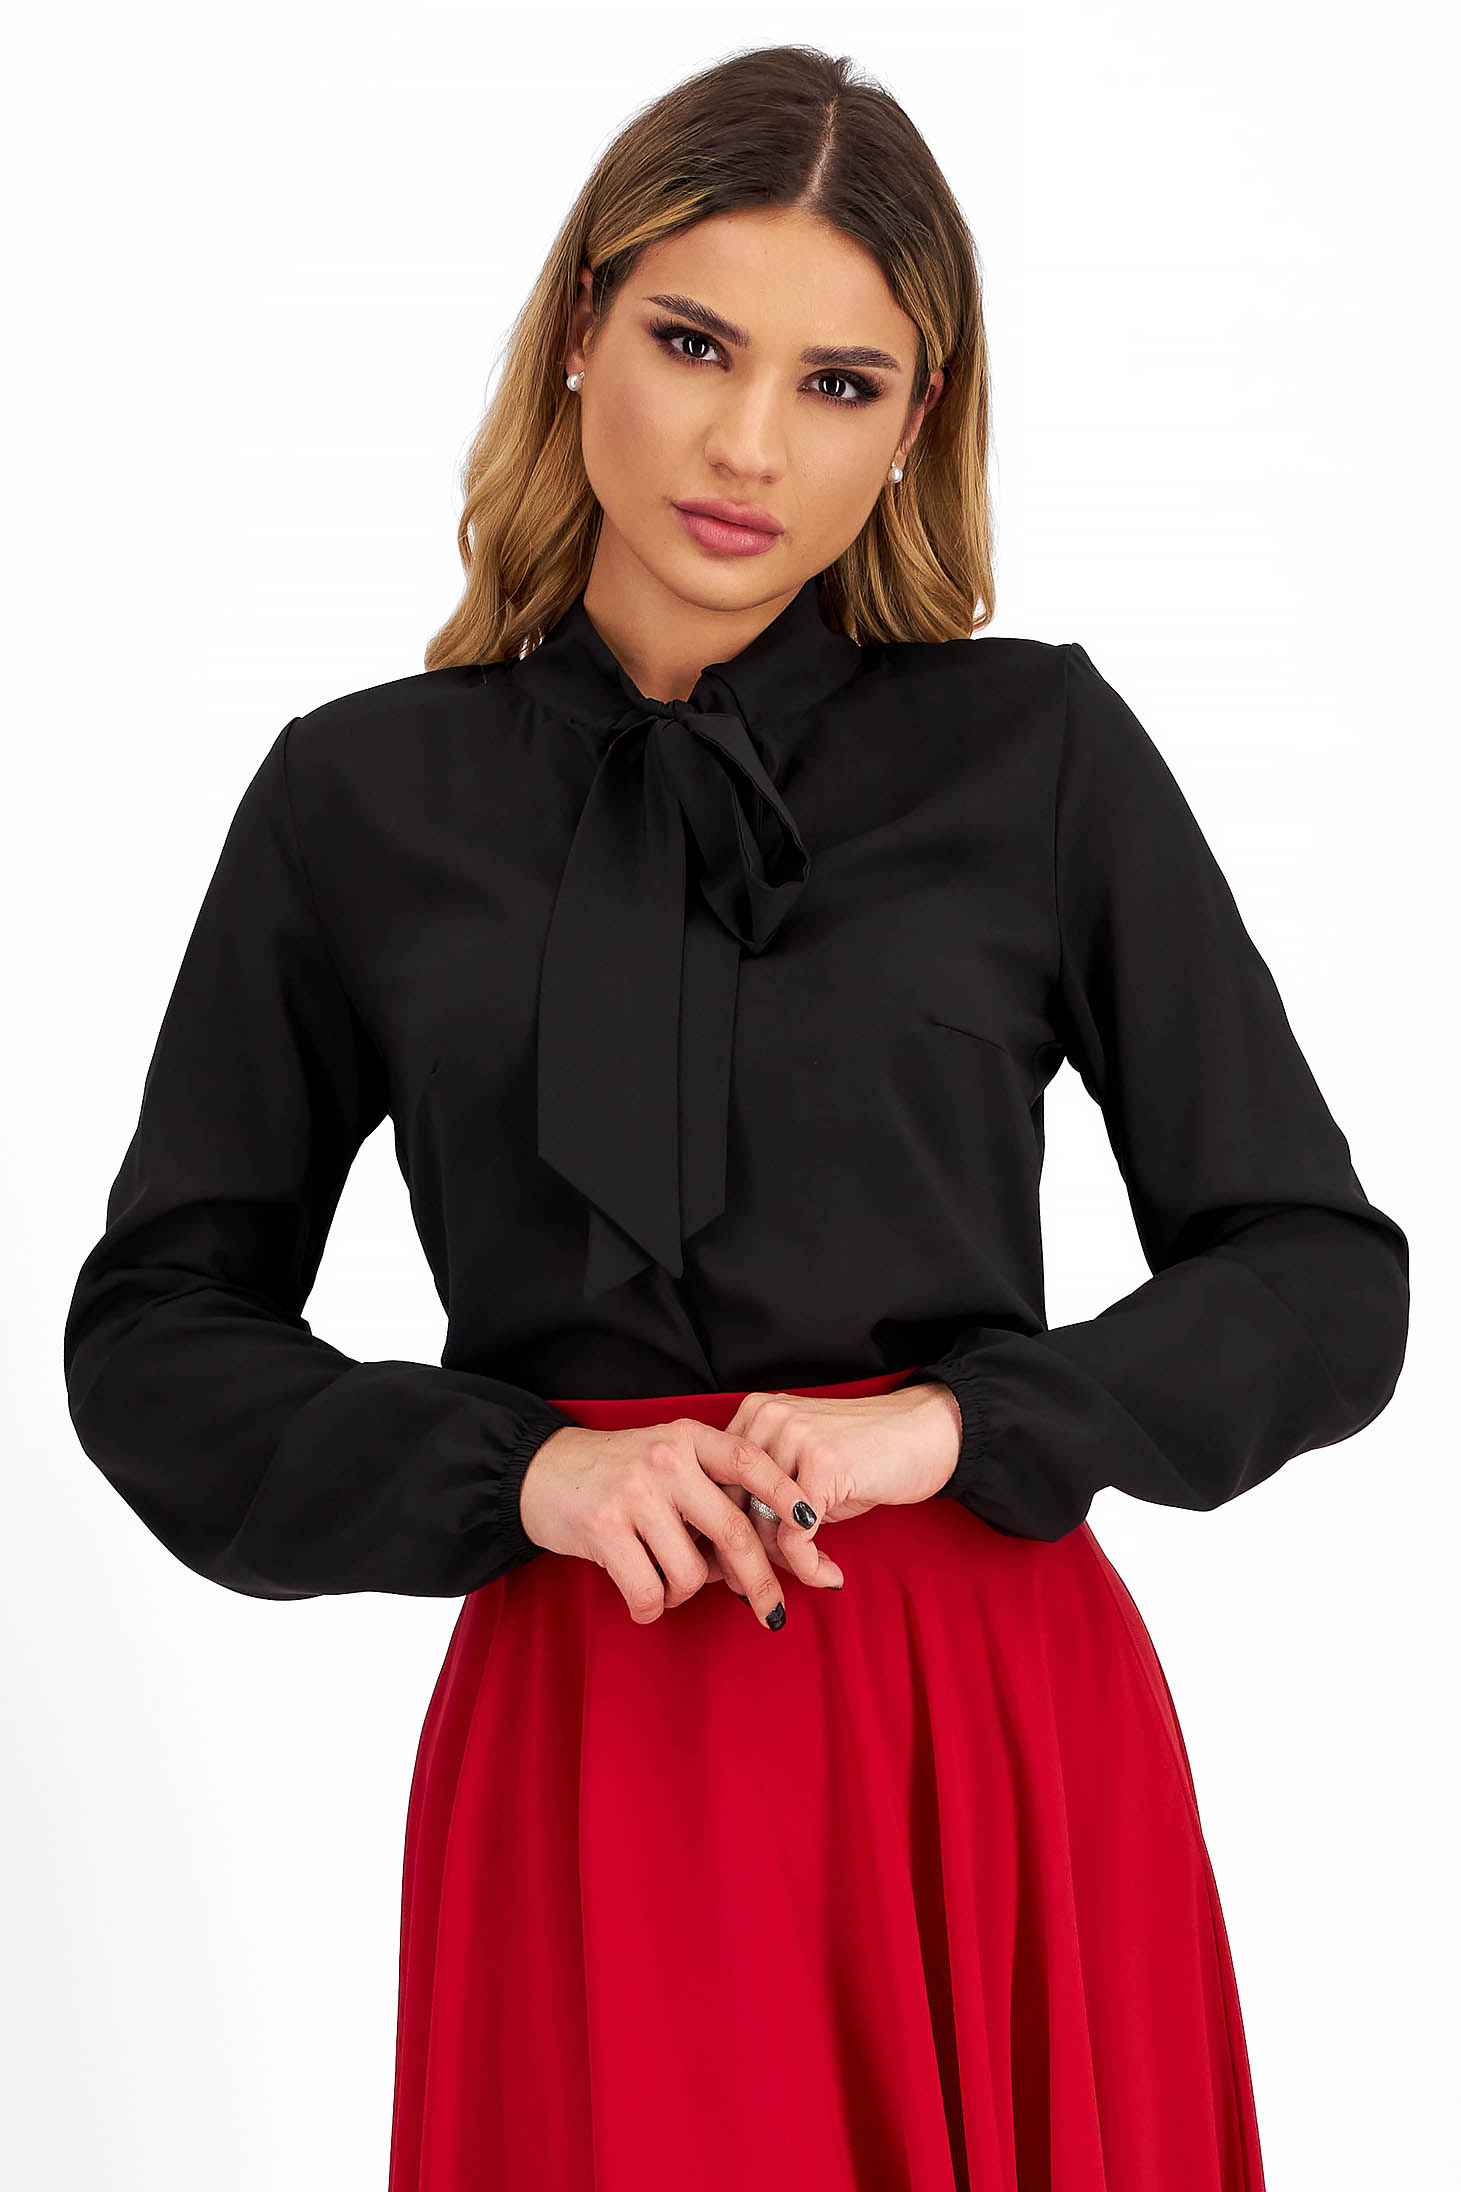 Ladies' blouse made of black veil with body cut and scarf-type collar - StarShinerS 1 - StarShinerS.com